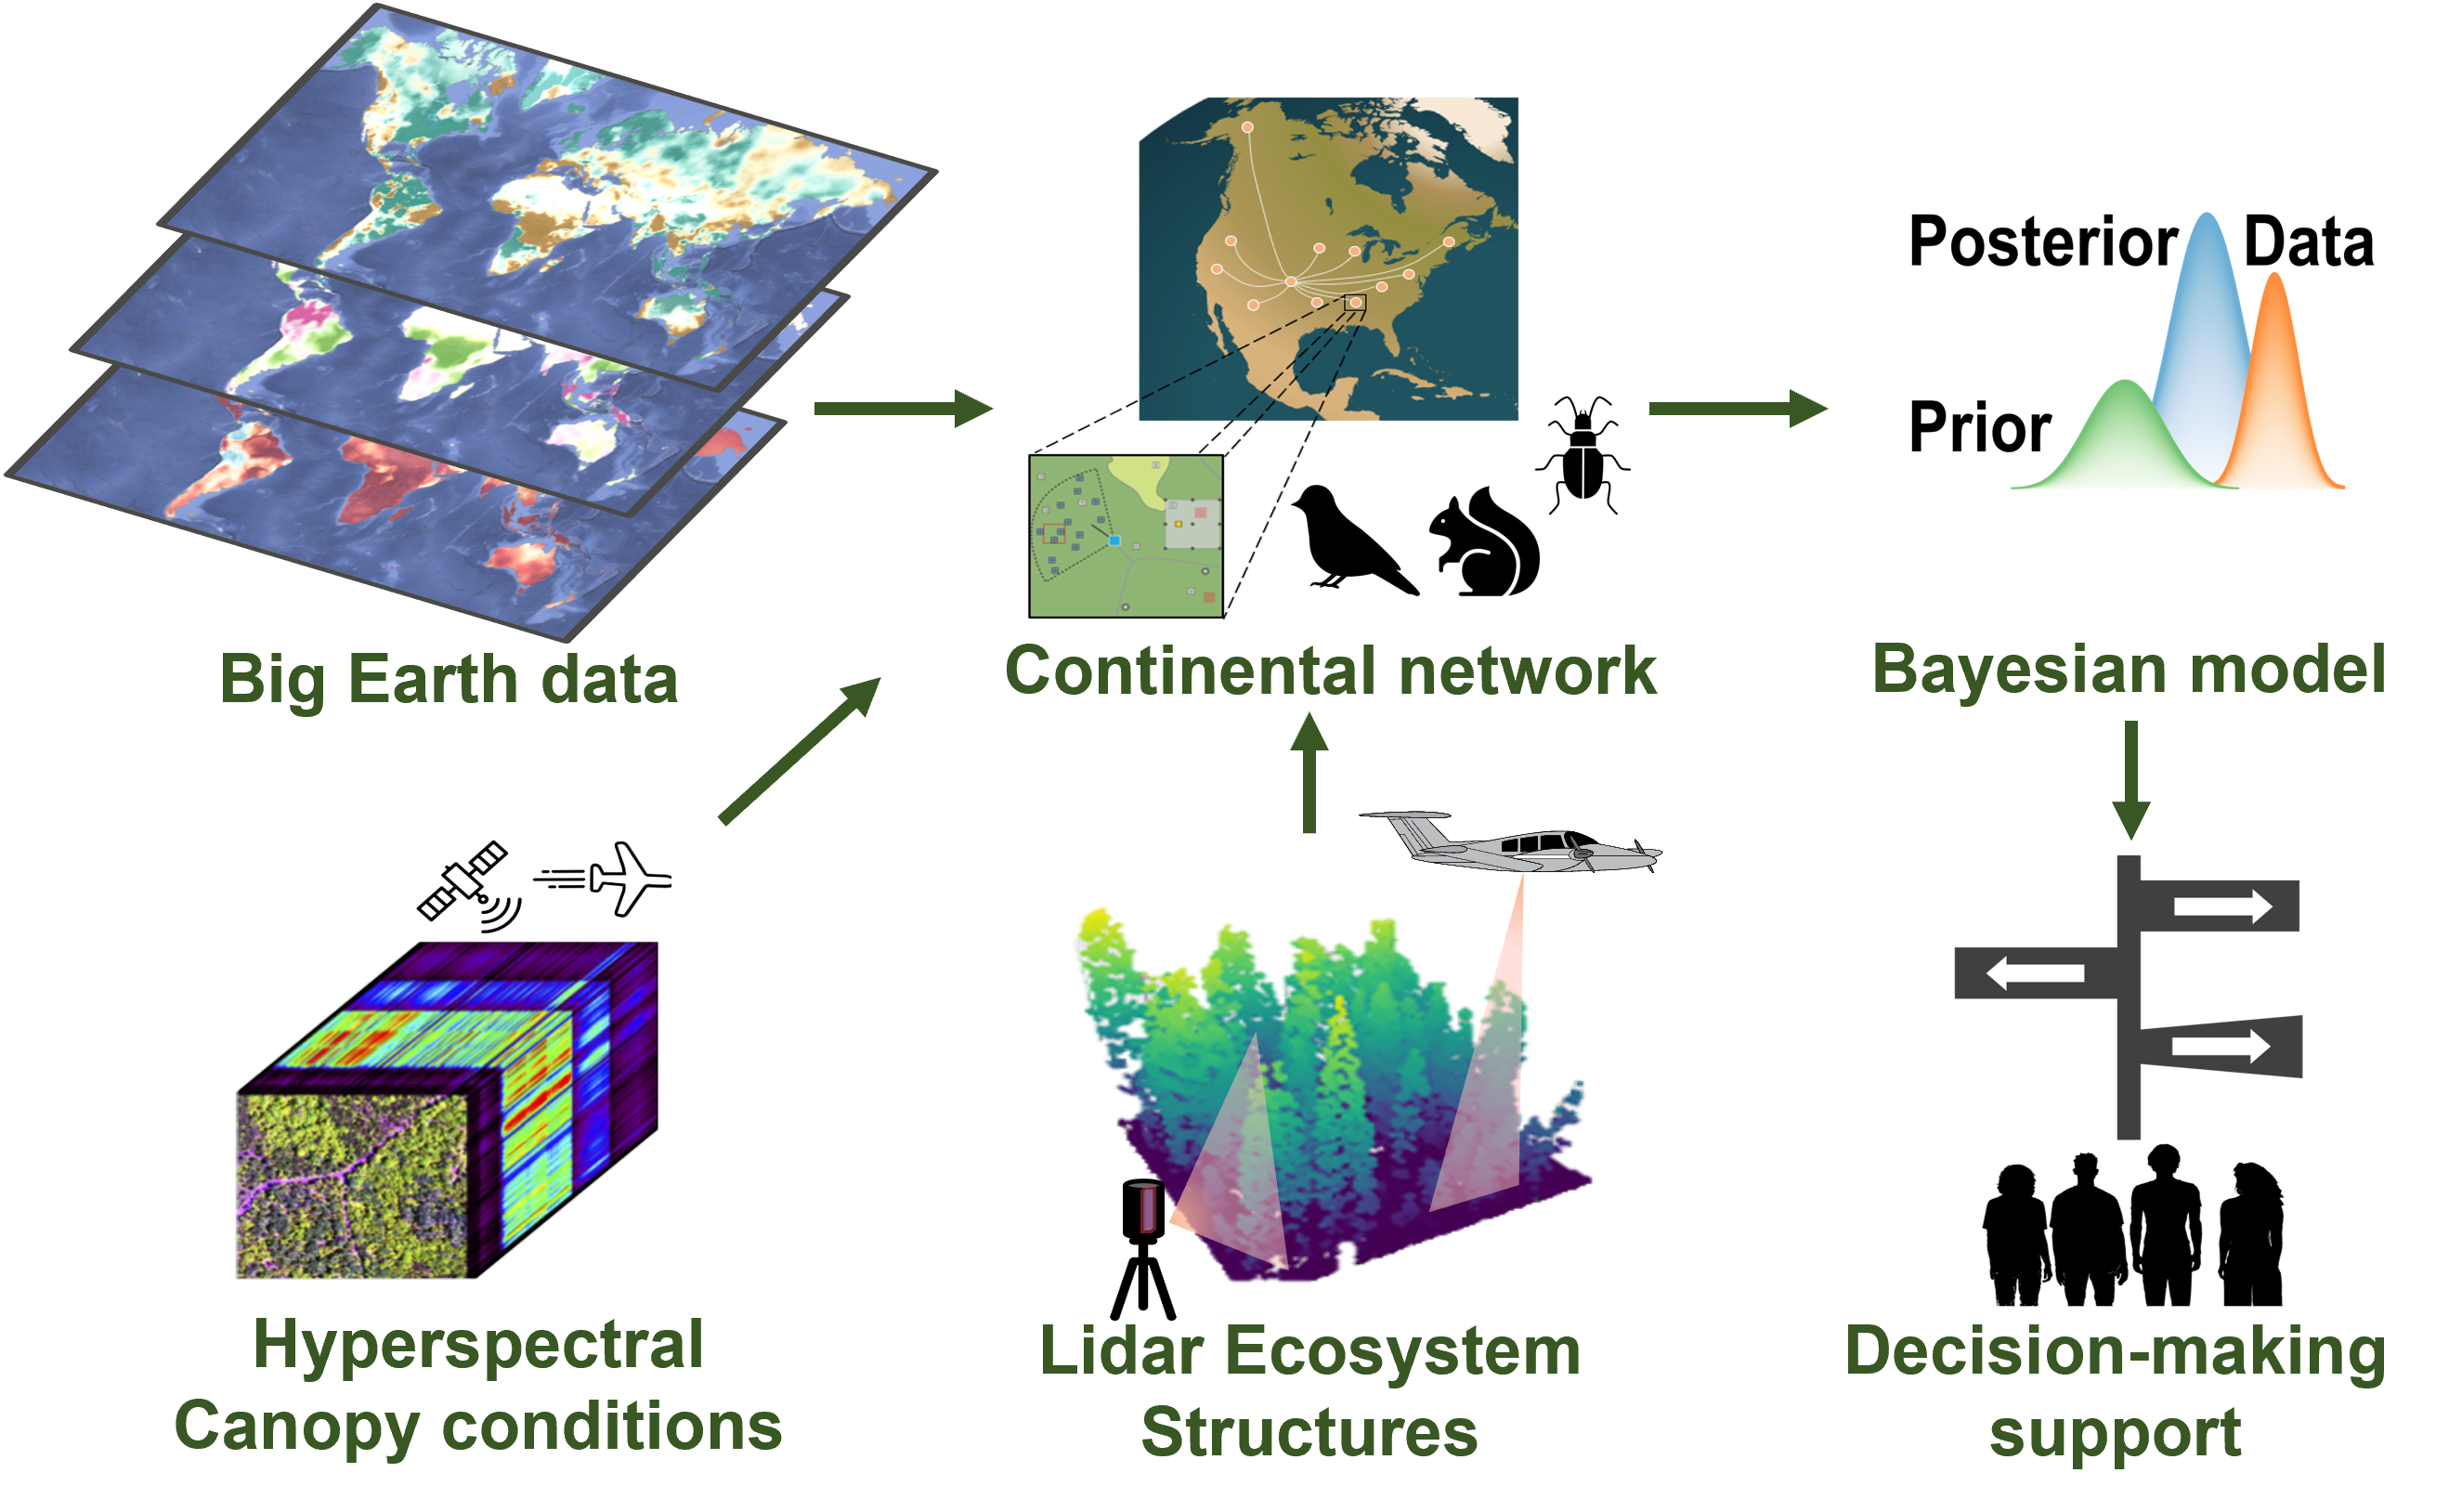 We synthesize satellite and airborn remote sensing with ecological monitoring network with Bayesian hierarchical models to understand how habitat modulate climate change impacts on biodiversity and develop decision-making support tools to conserve multiple species groups (e.g., ground beetles, small mammals, and birds).